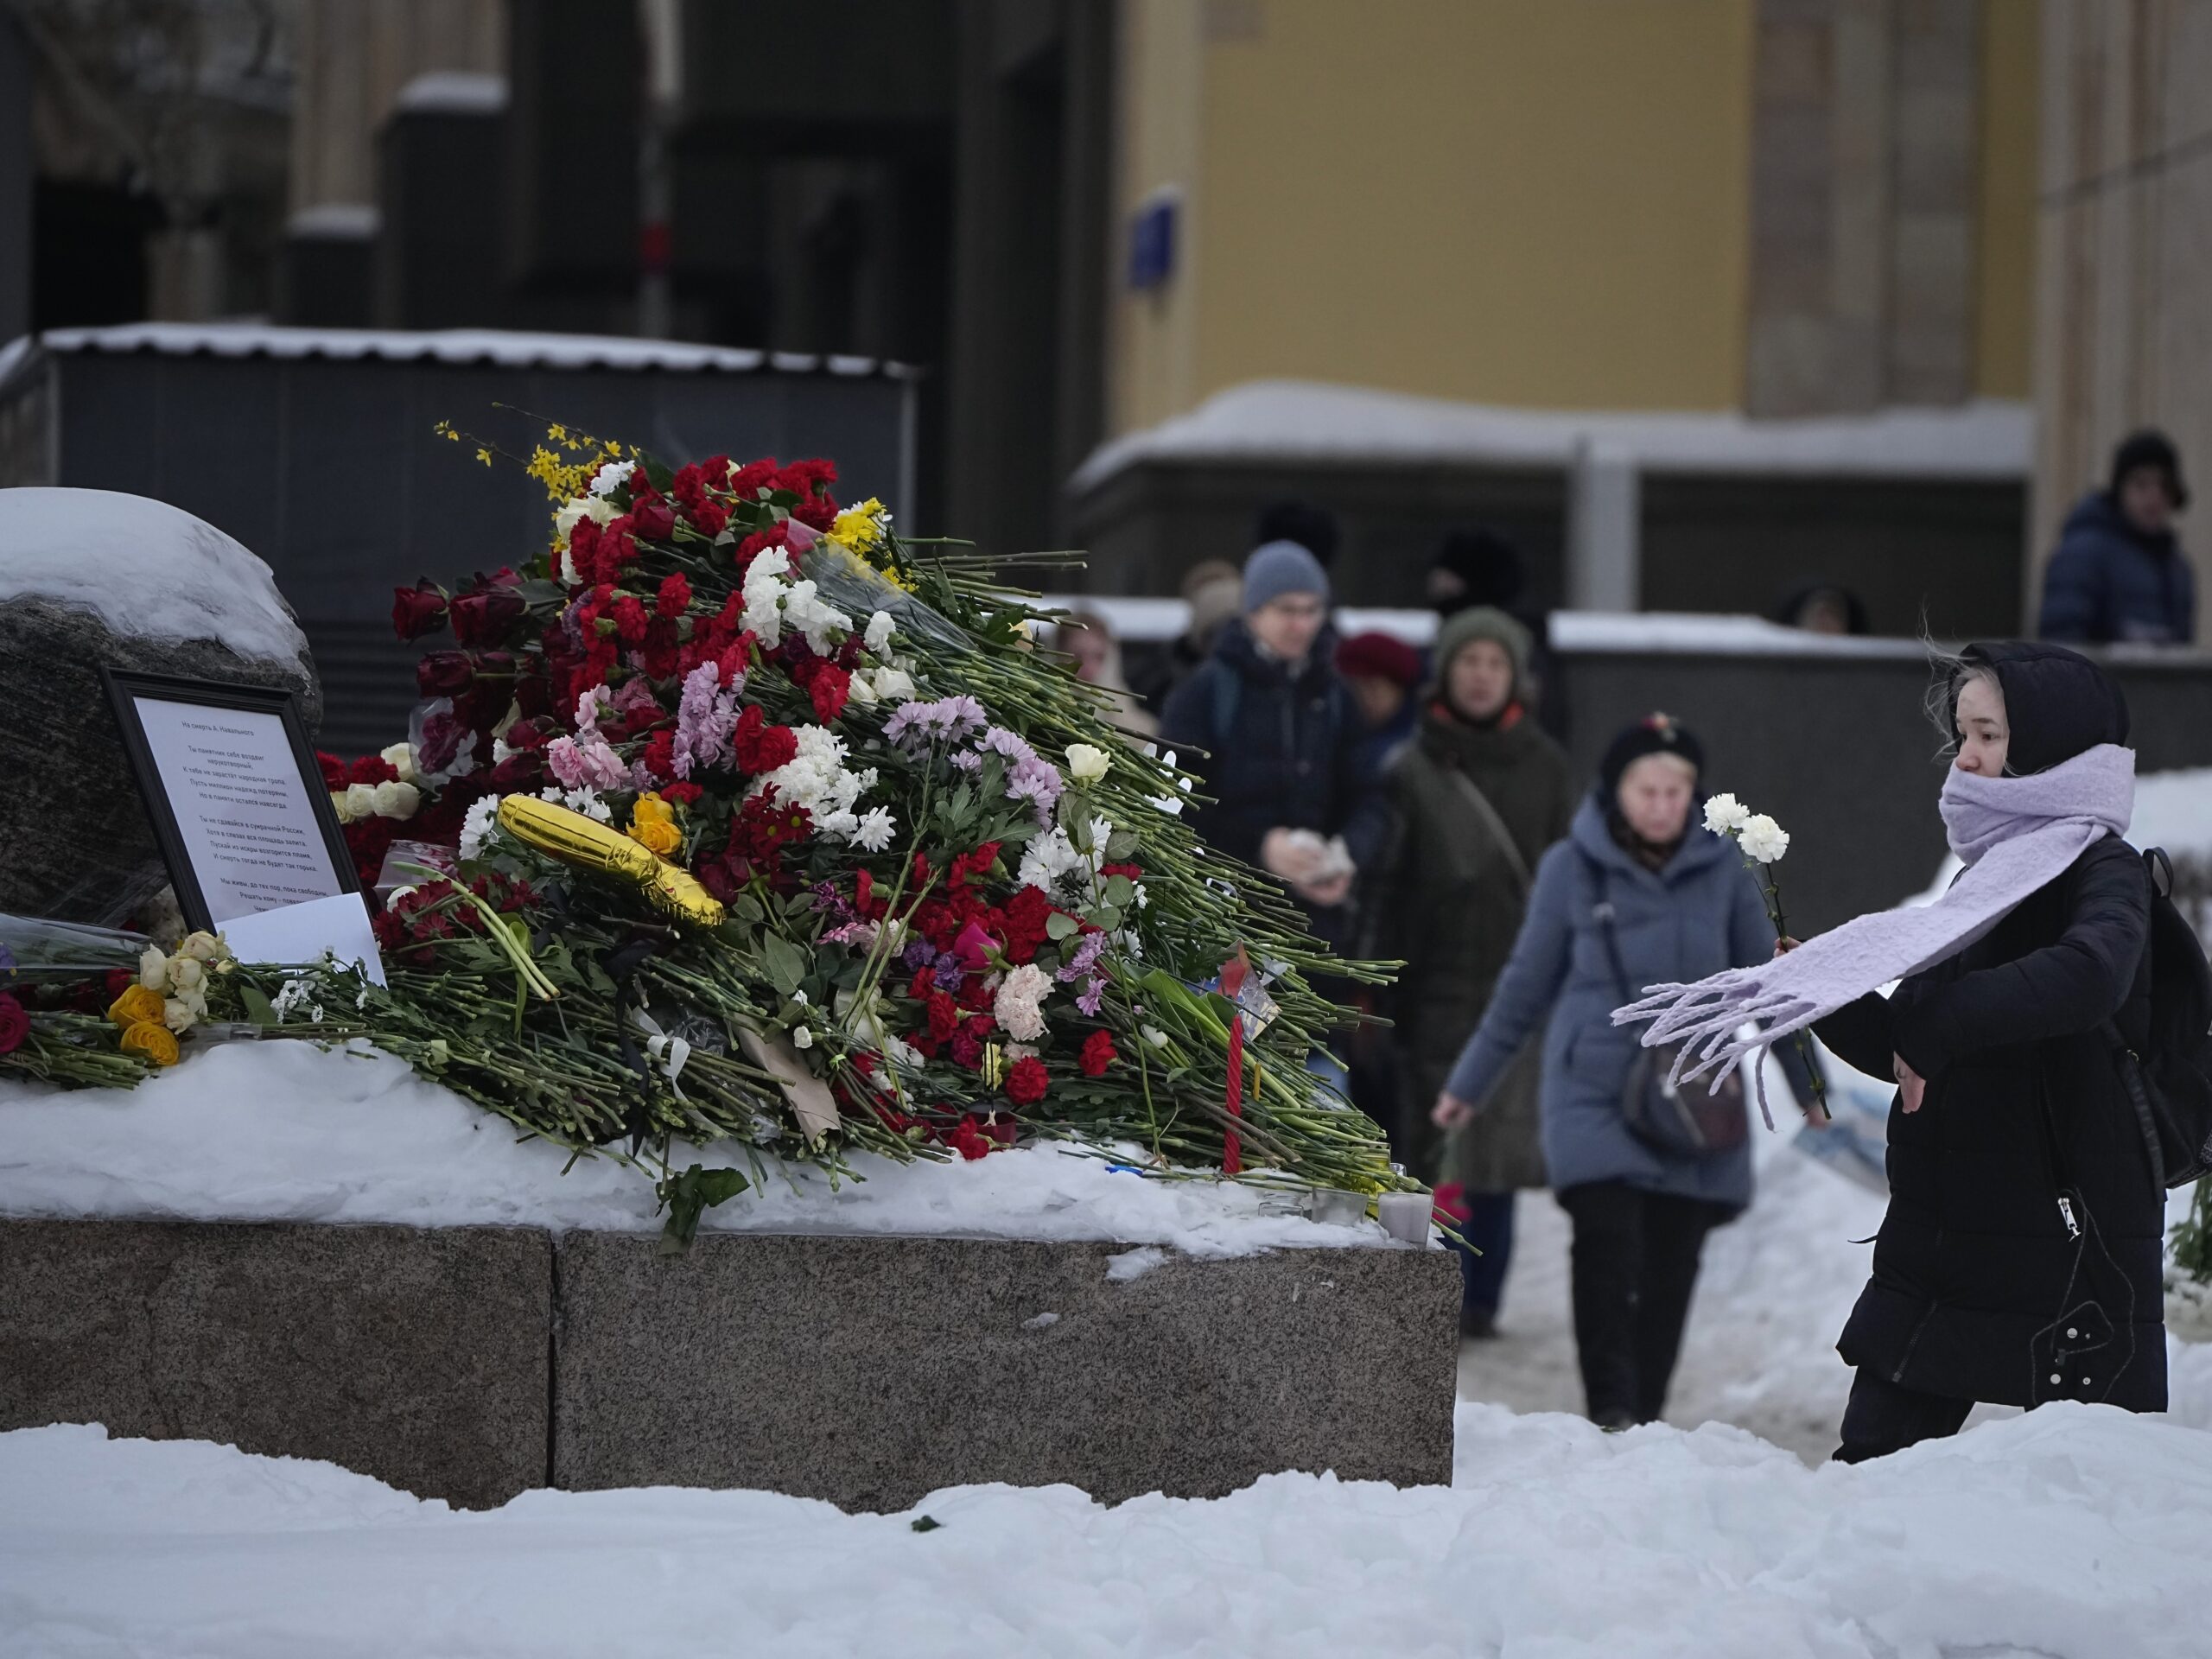 Over 400 detained in Russia as country mourns the death of Alexei Navalny